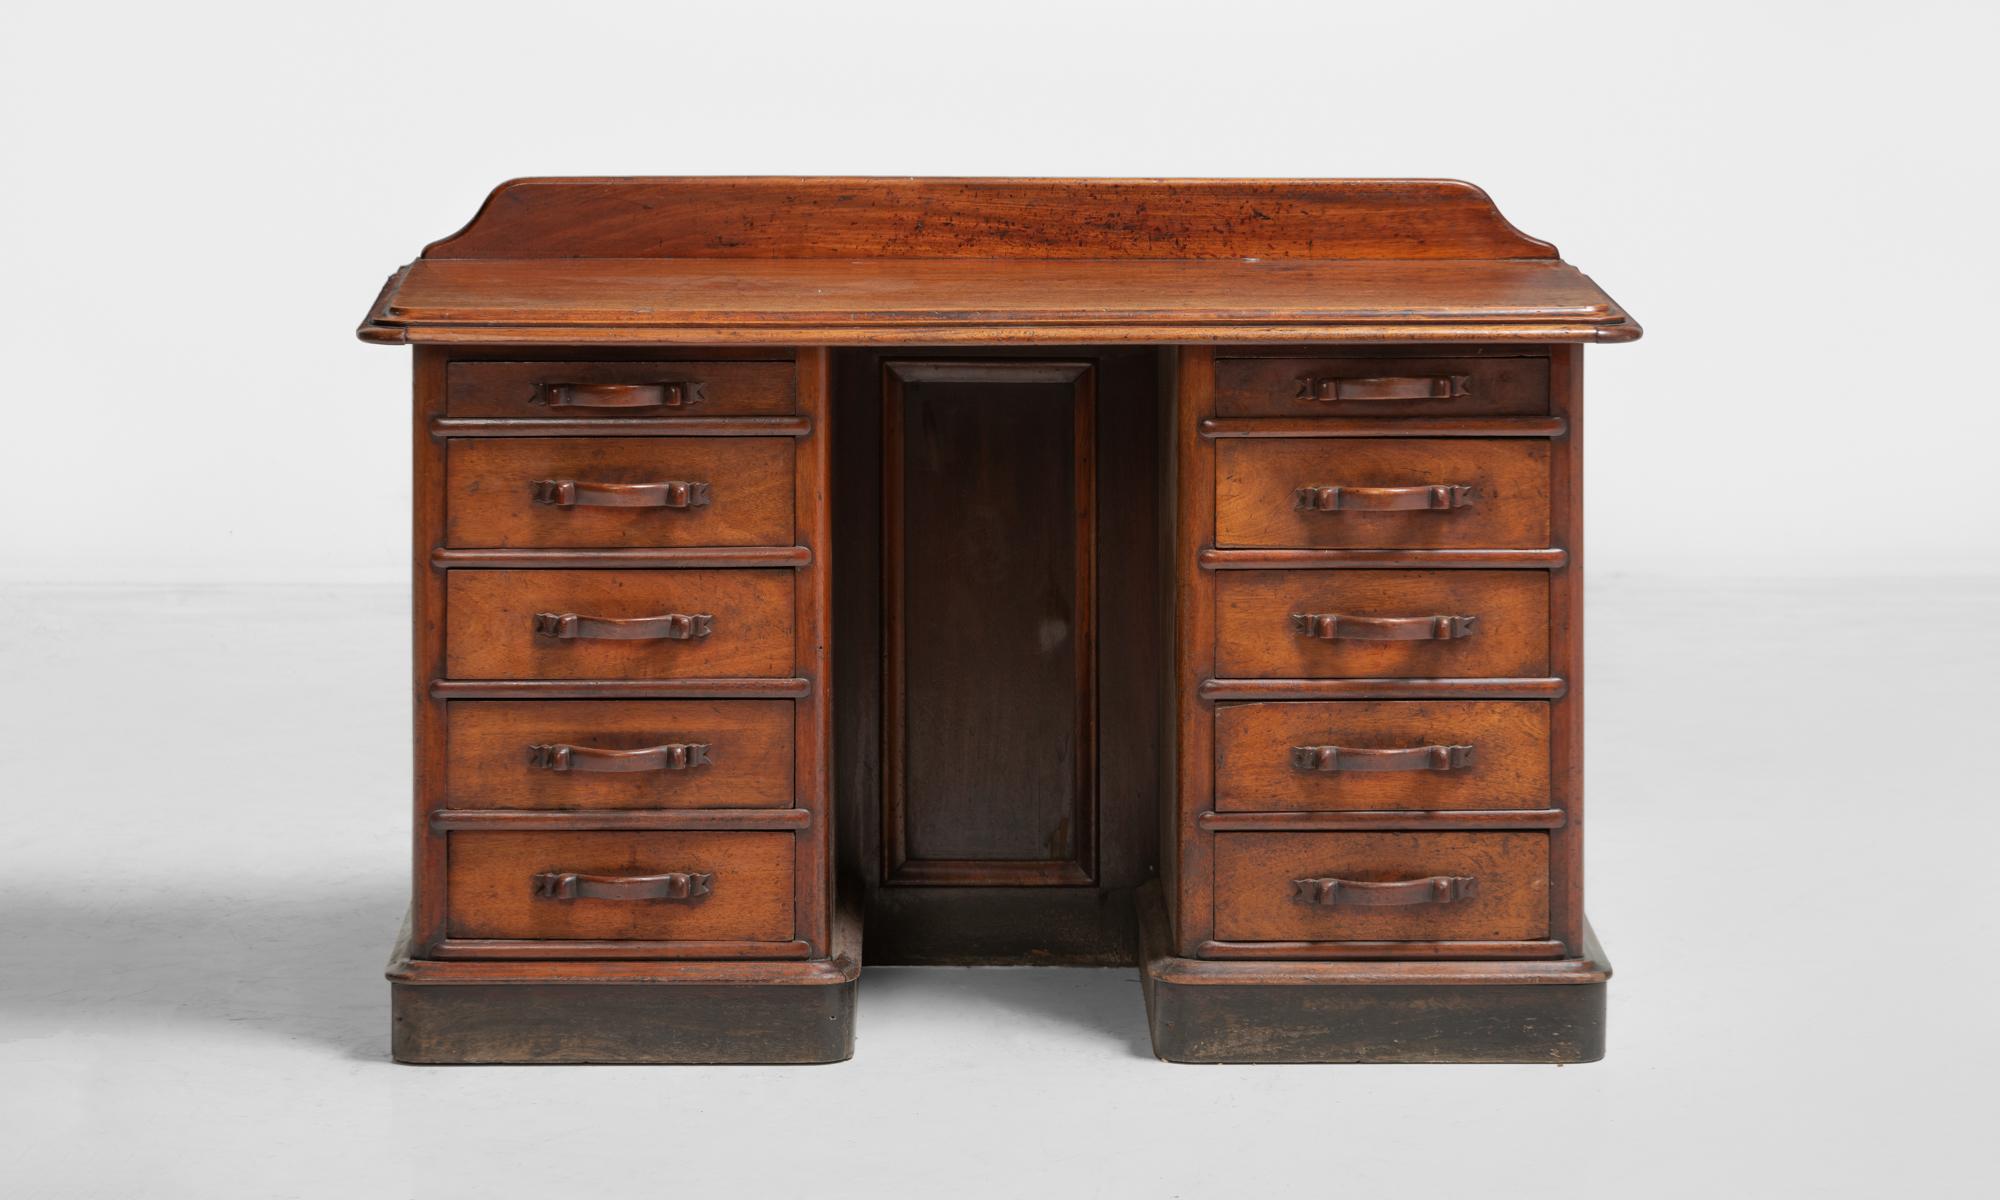 Handsome Mahogany Writing Desk, England, circa 1930

Small-scale desk made of mahogany wood. With amazing patina and carved wooden handles.